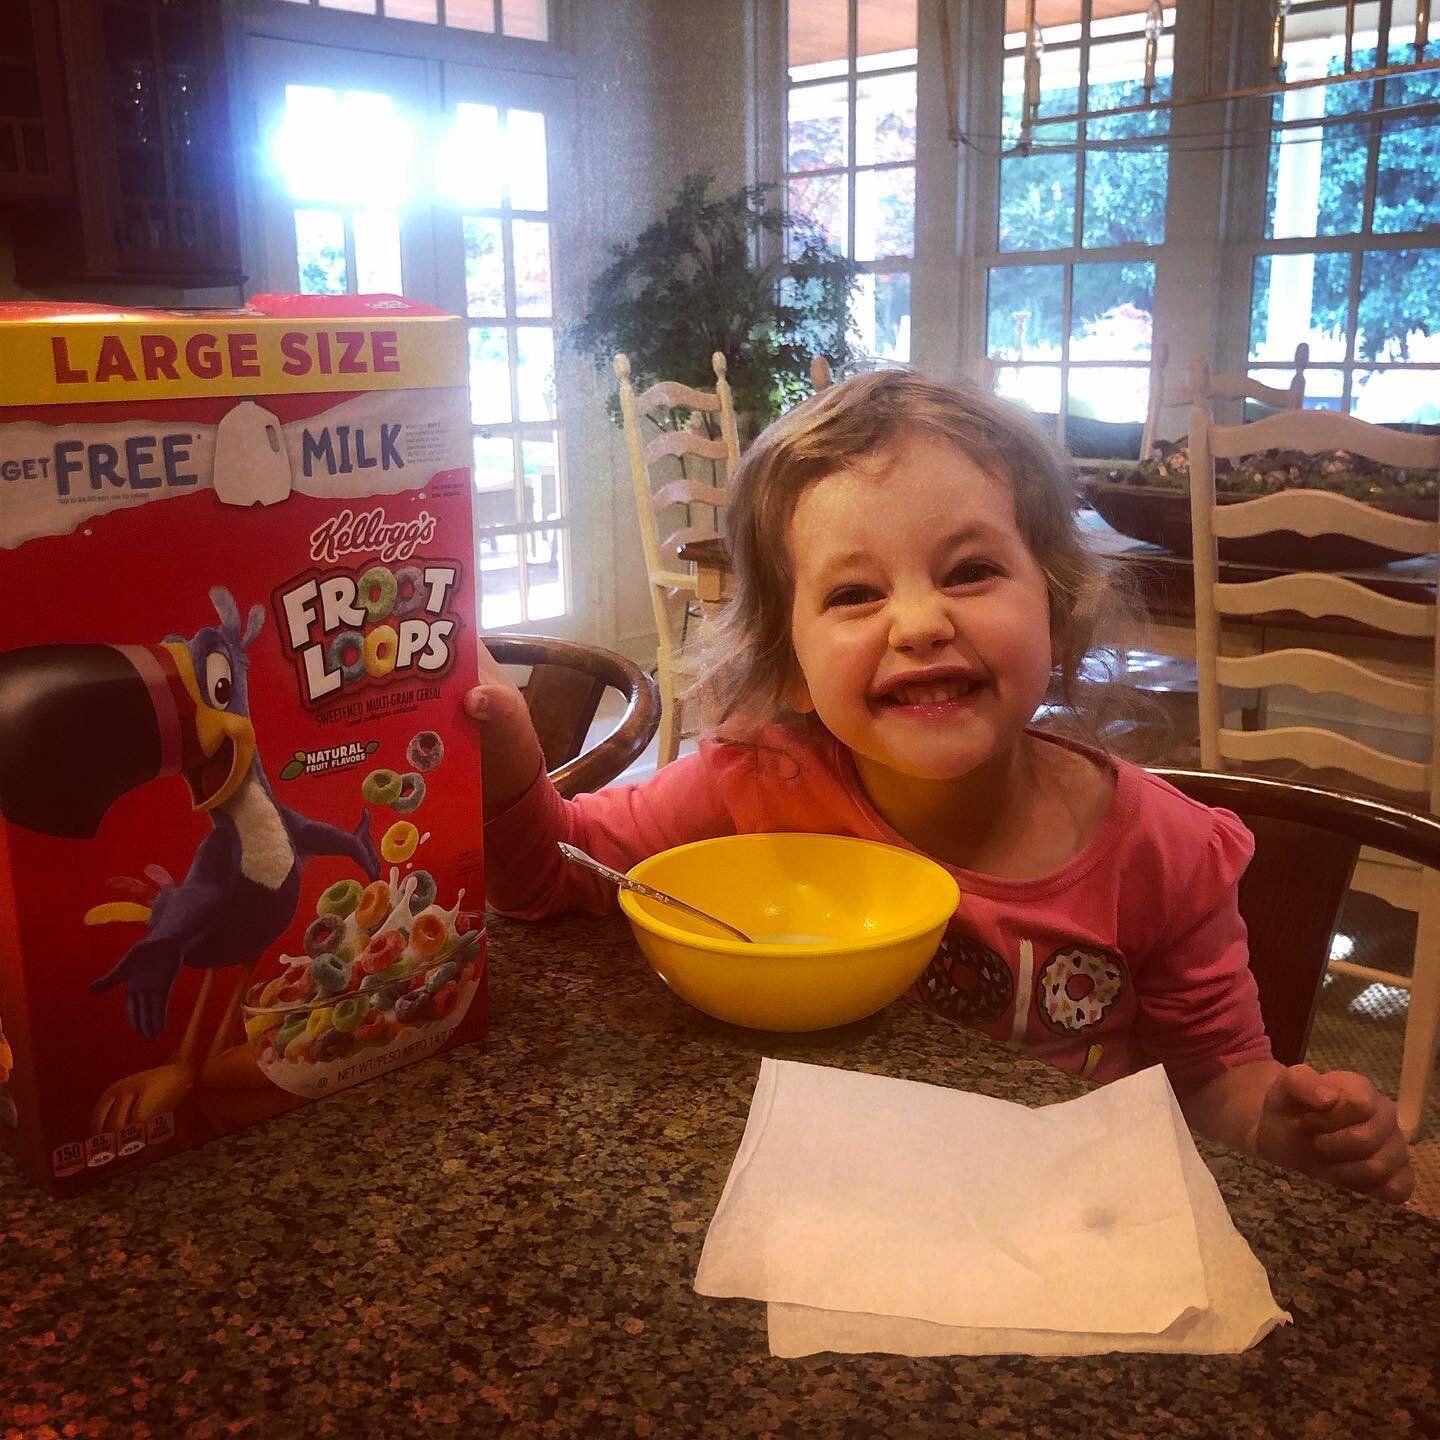 Since July  #adileenkate has been asking for Froot Loops when we go visit the United States. Thanks to @annocopeland and @kincopeland her first snack when we got to Alabama today was of course...Froot Loops. That face is pure joy. 😂 We&rsquo;re all 